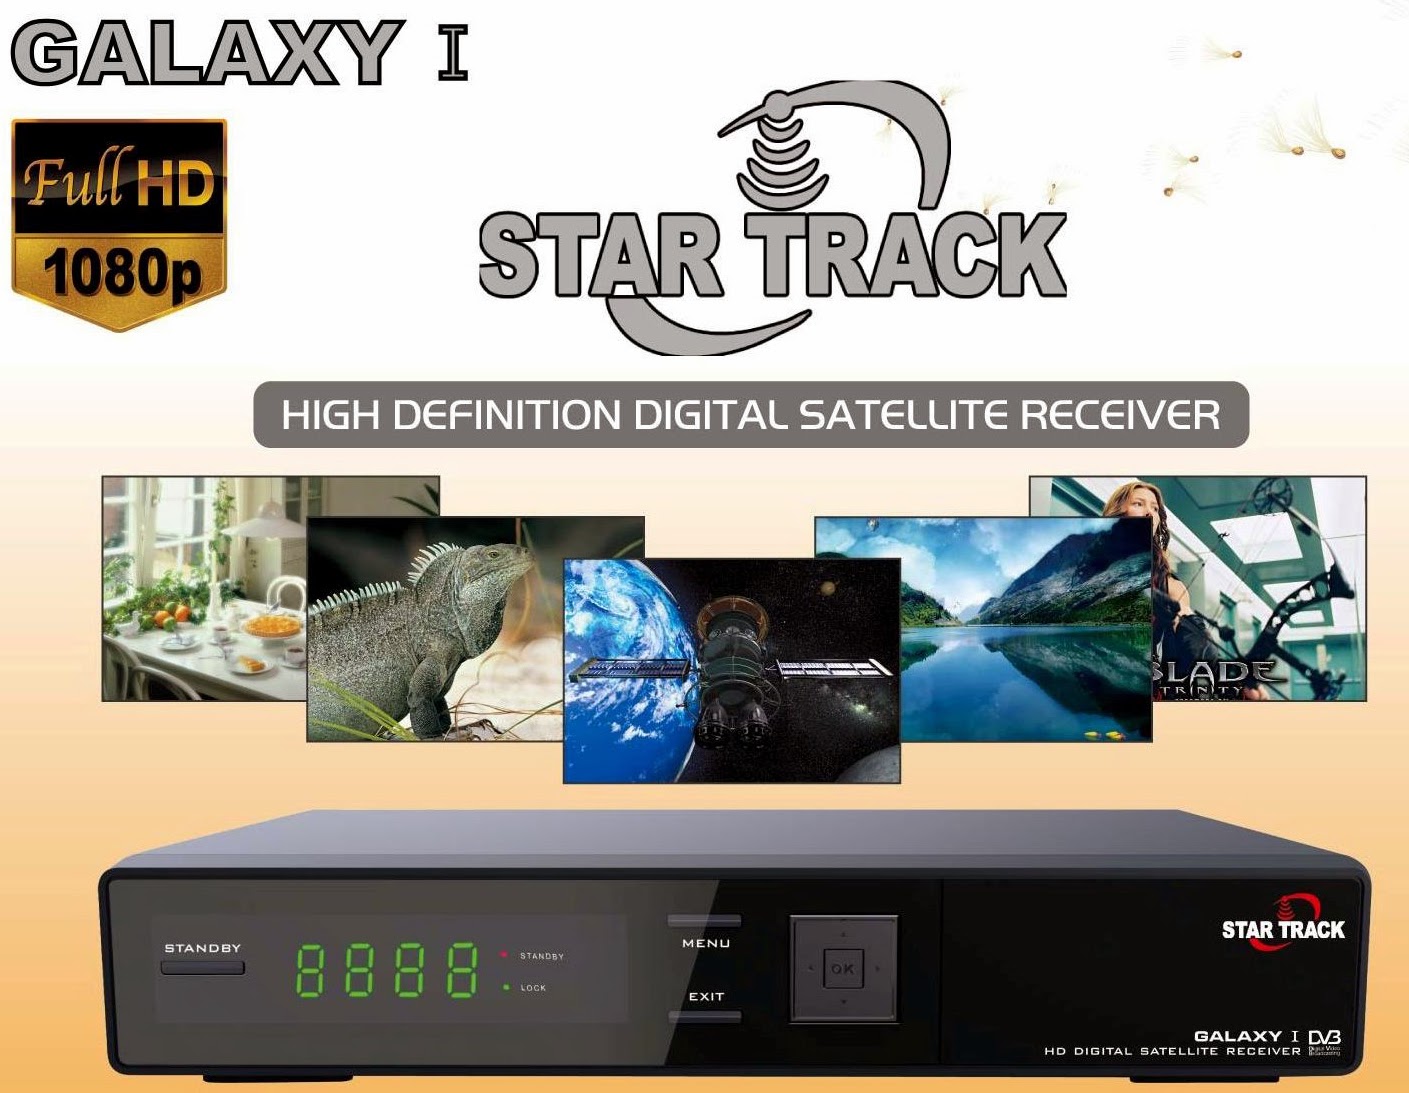 HDCP Copy Protection Of StarTrack Galaxy 1 HD